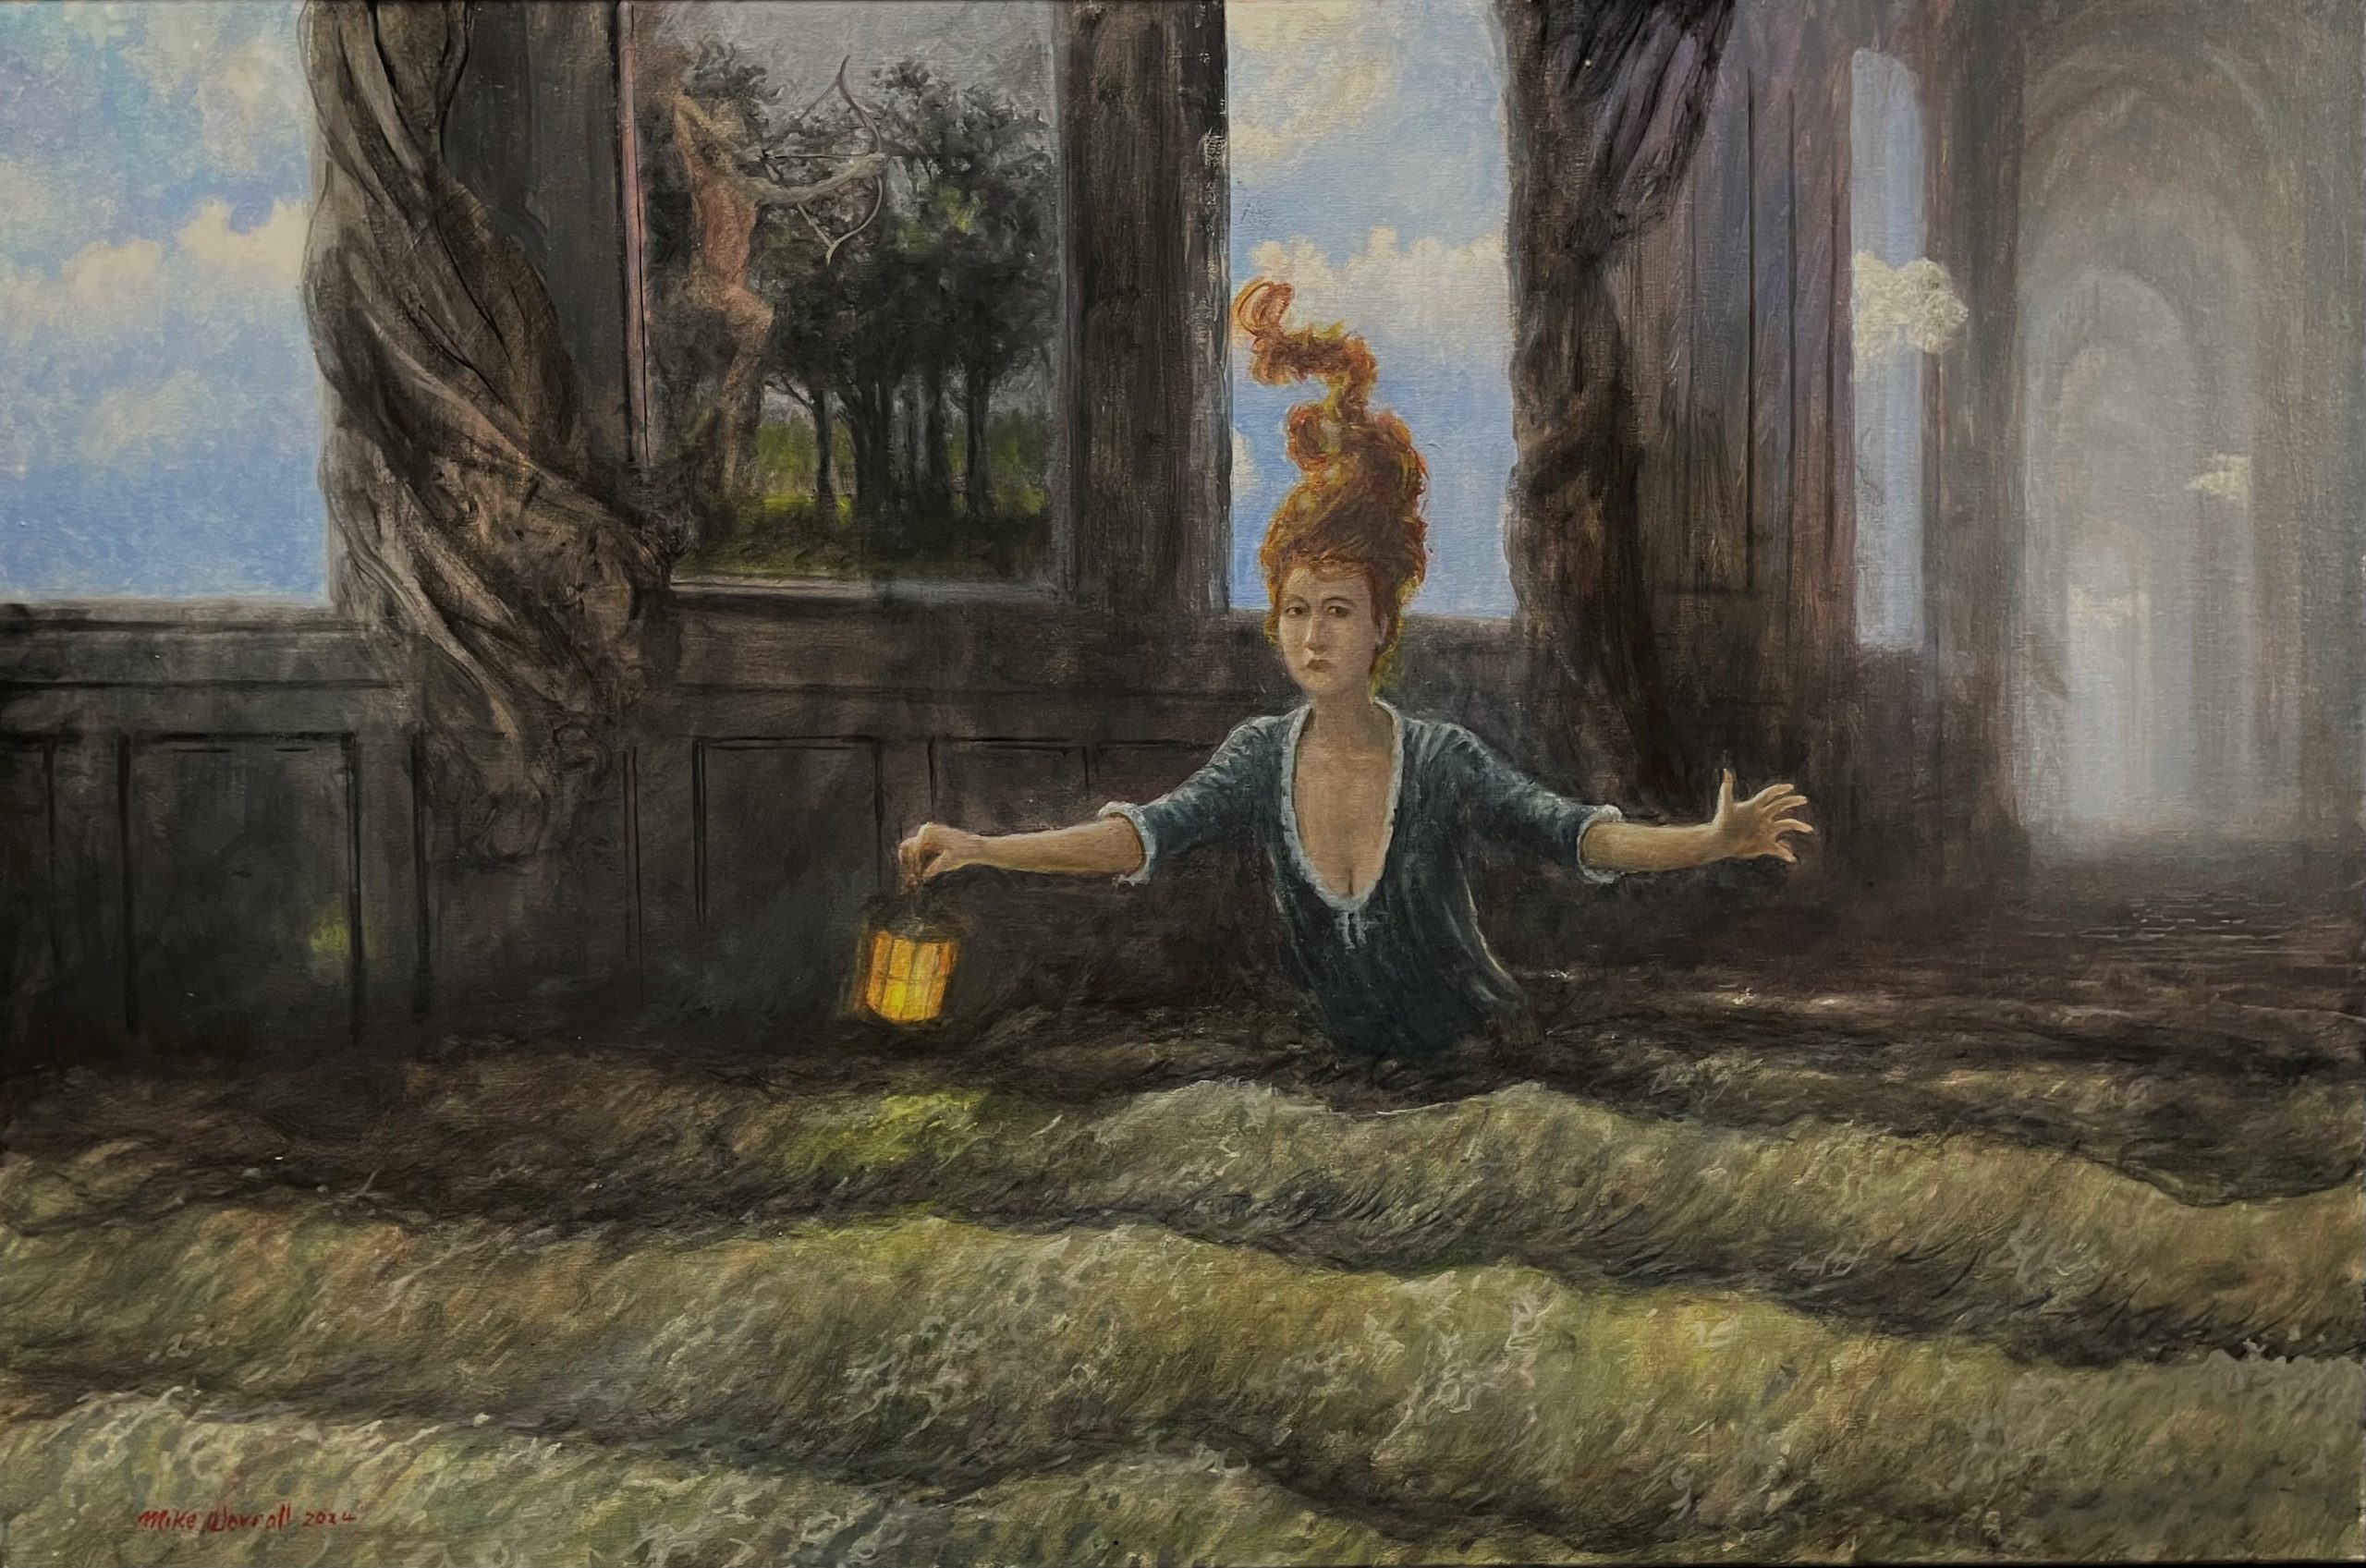 Mike Worrall 'Wading Through a Wet Dream' oil on linen 61 x 91cm $10000